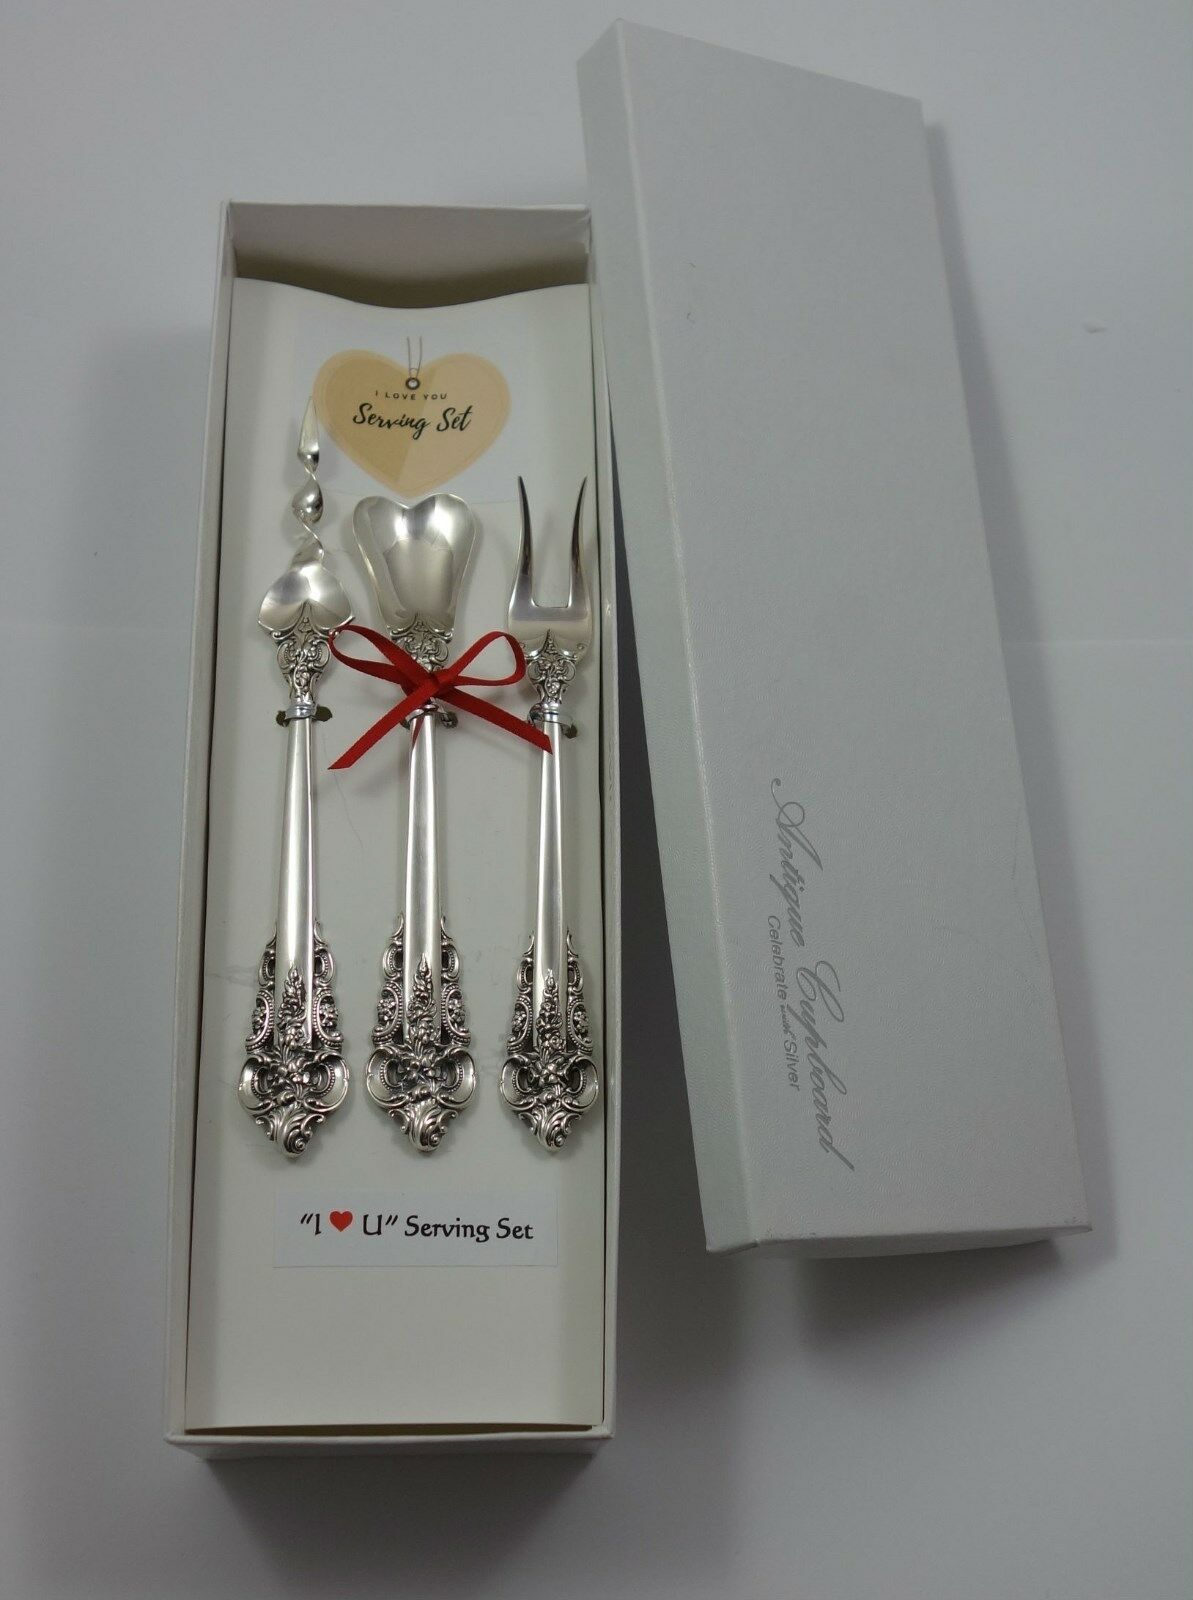 Grande Baroque by Wallace Sterling Silver I Love You Serving Set Valentines Gift - $246.51